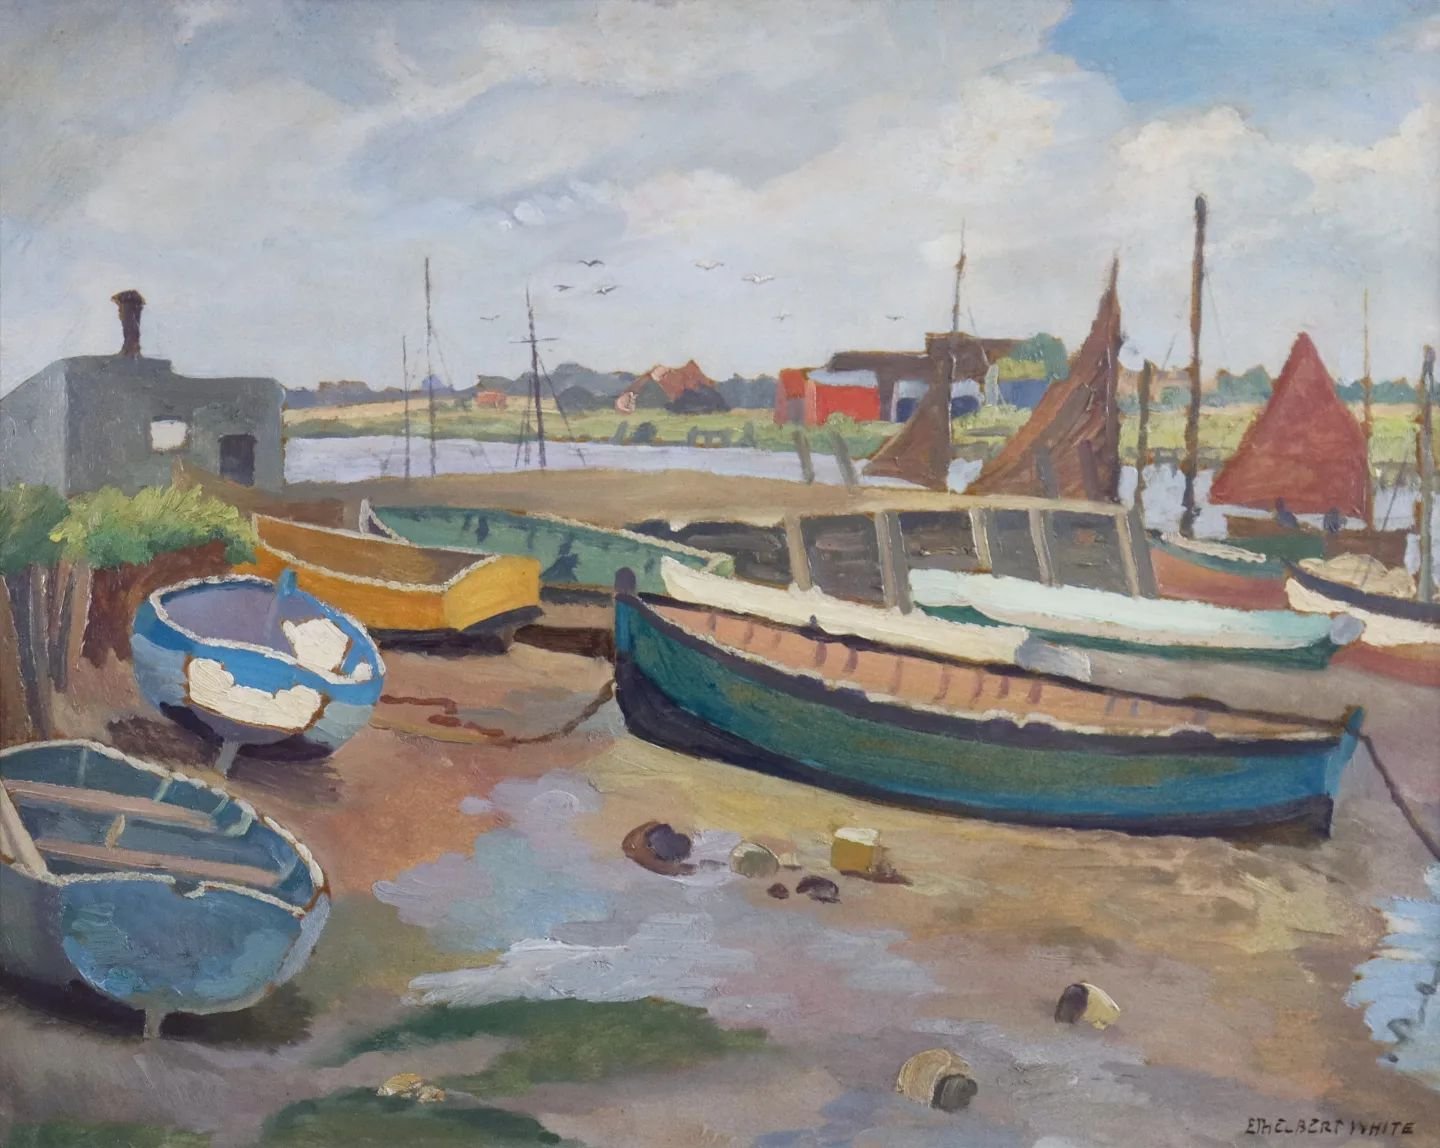 .
Ethelbert White (1891-1972)
The Ferry, Walberswick
Oil on board 

Included in our 28th May Fine Art &amp; Antiques Sale

Entries invited until 18th May

.

.

.

.

.

.

.

.

#fineart #painting #paintings #oilpainting #britishart #20thcenturyart 